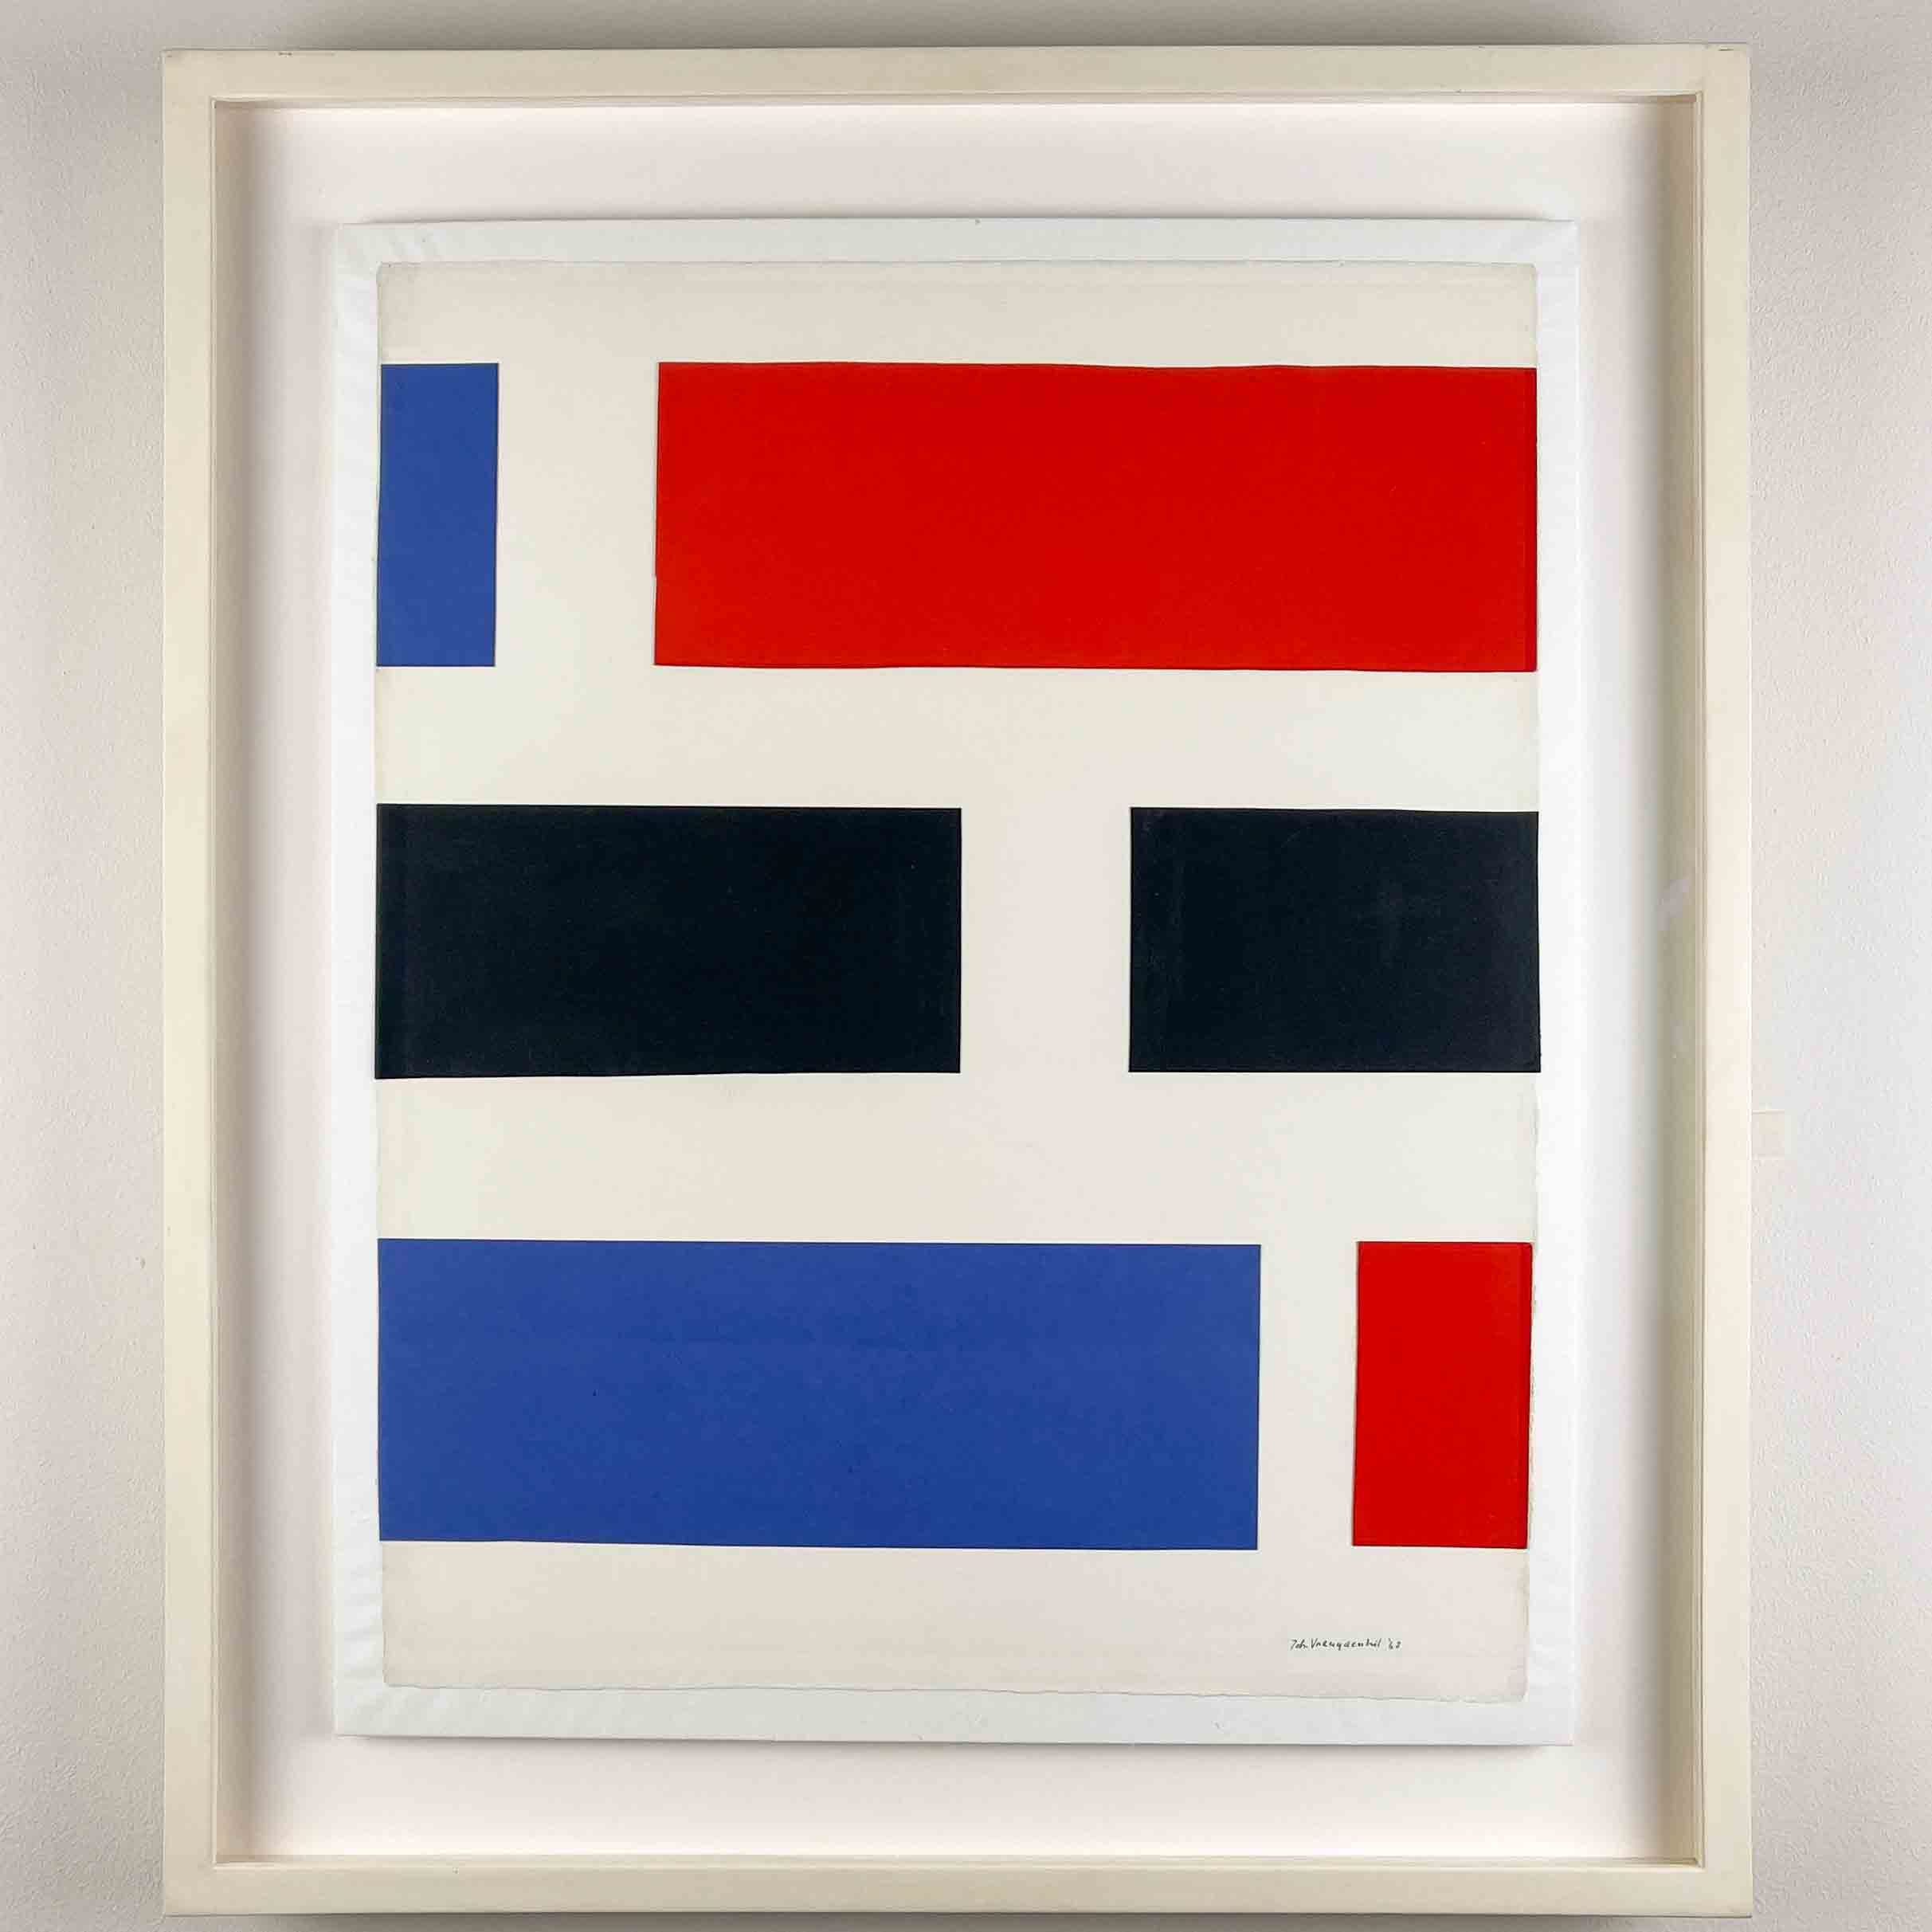 Joop Vreugdenhil - Abstract composition, 1968 - collage on paper, profesionally framed, museumglass